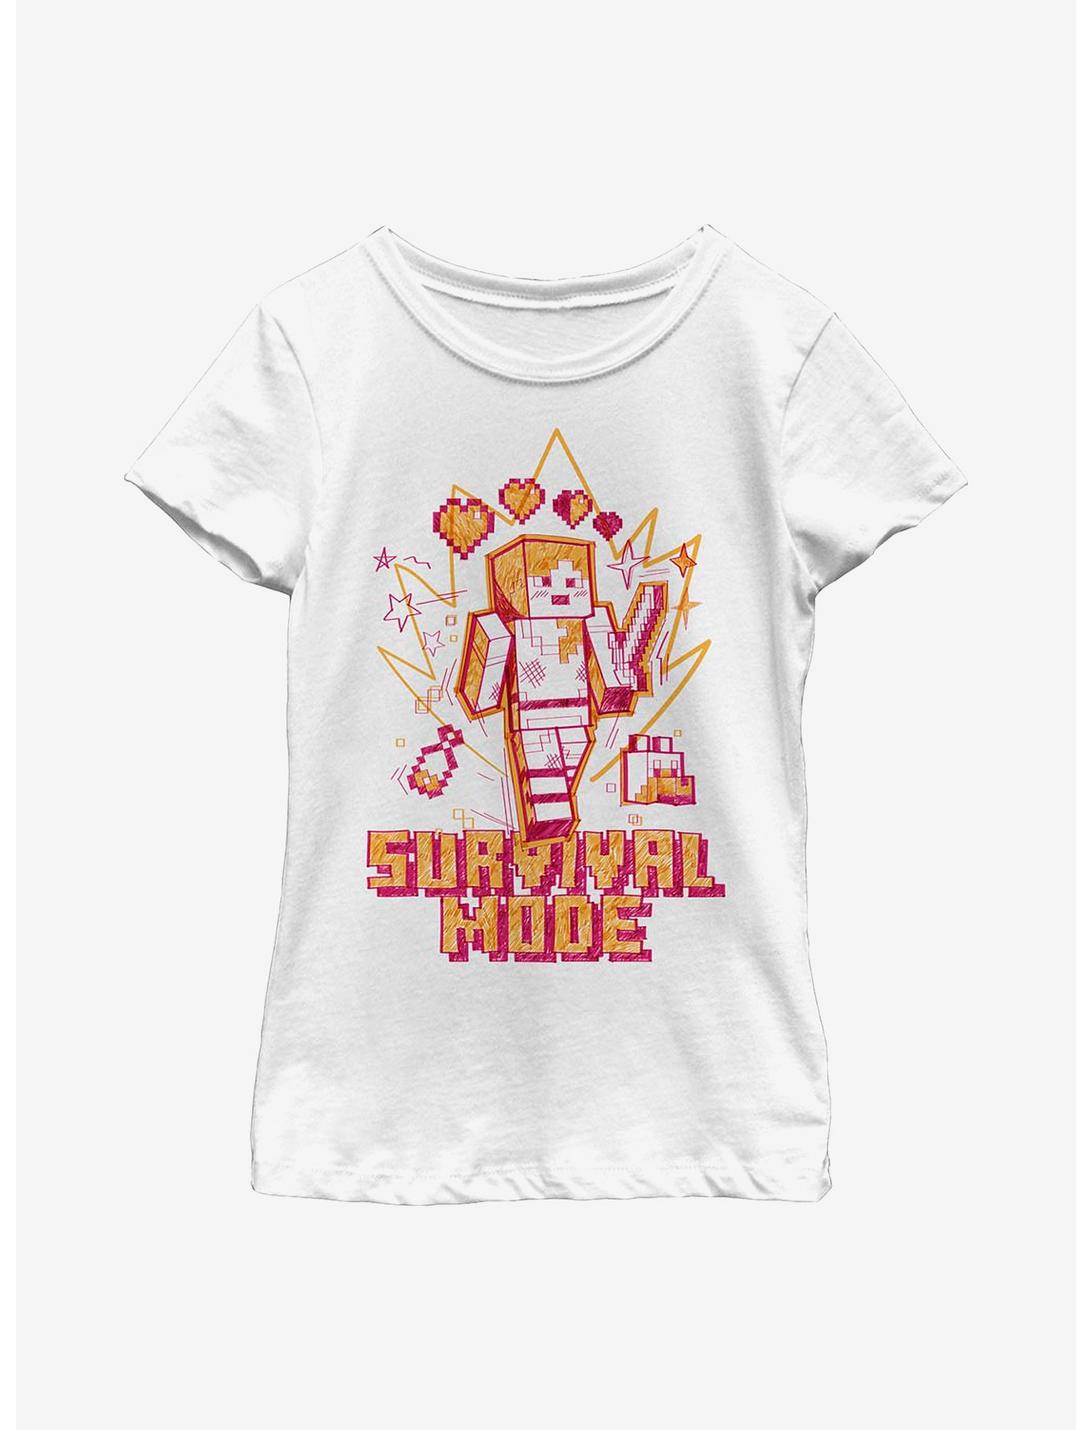 Minecraft Survival Mode Sketch Youth Girls T-Shirt, WHITE, hi-res